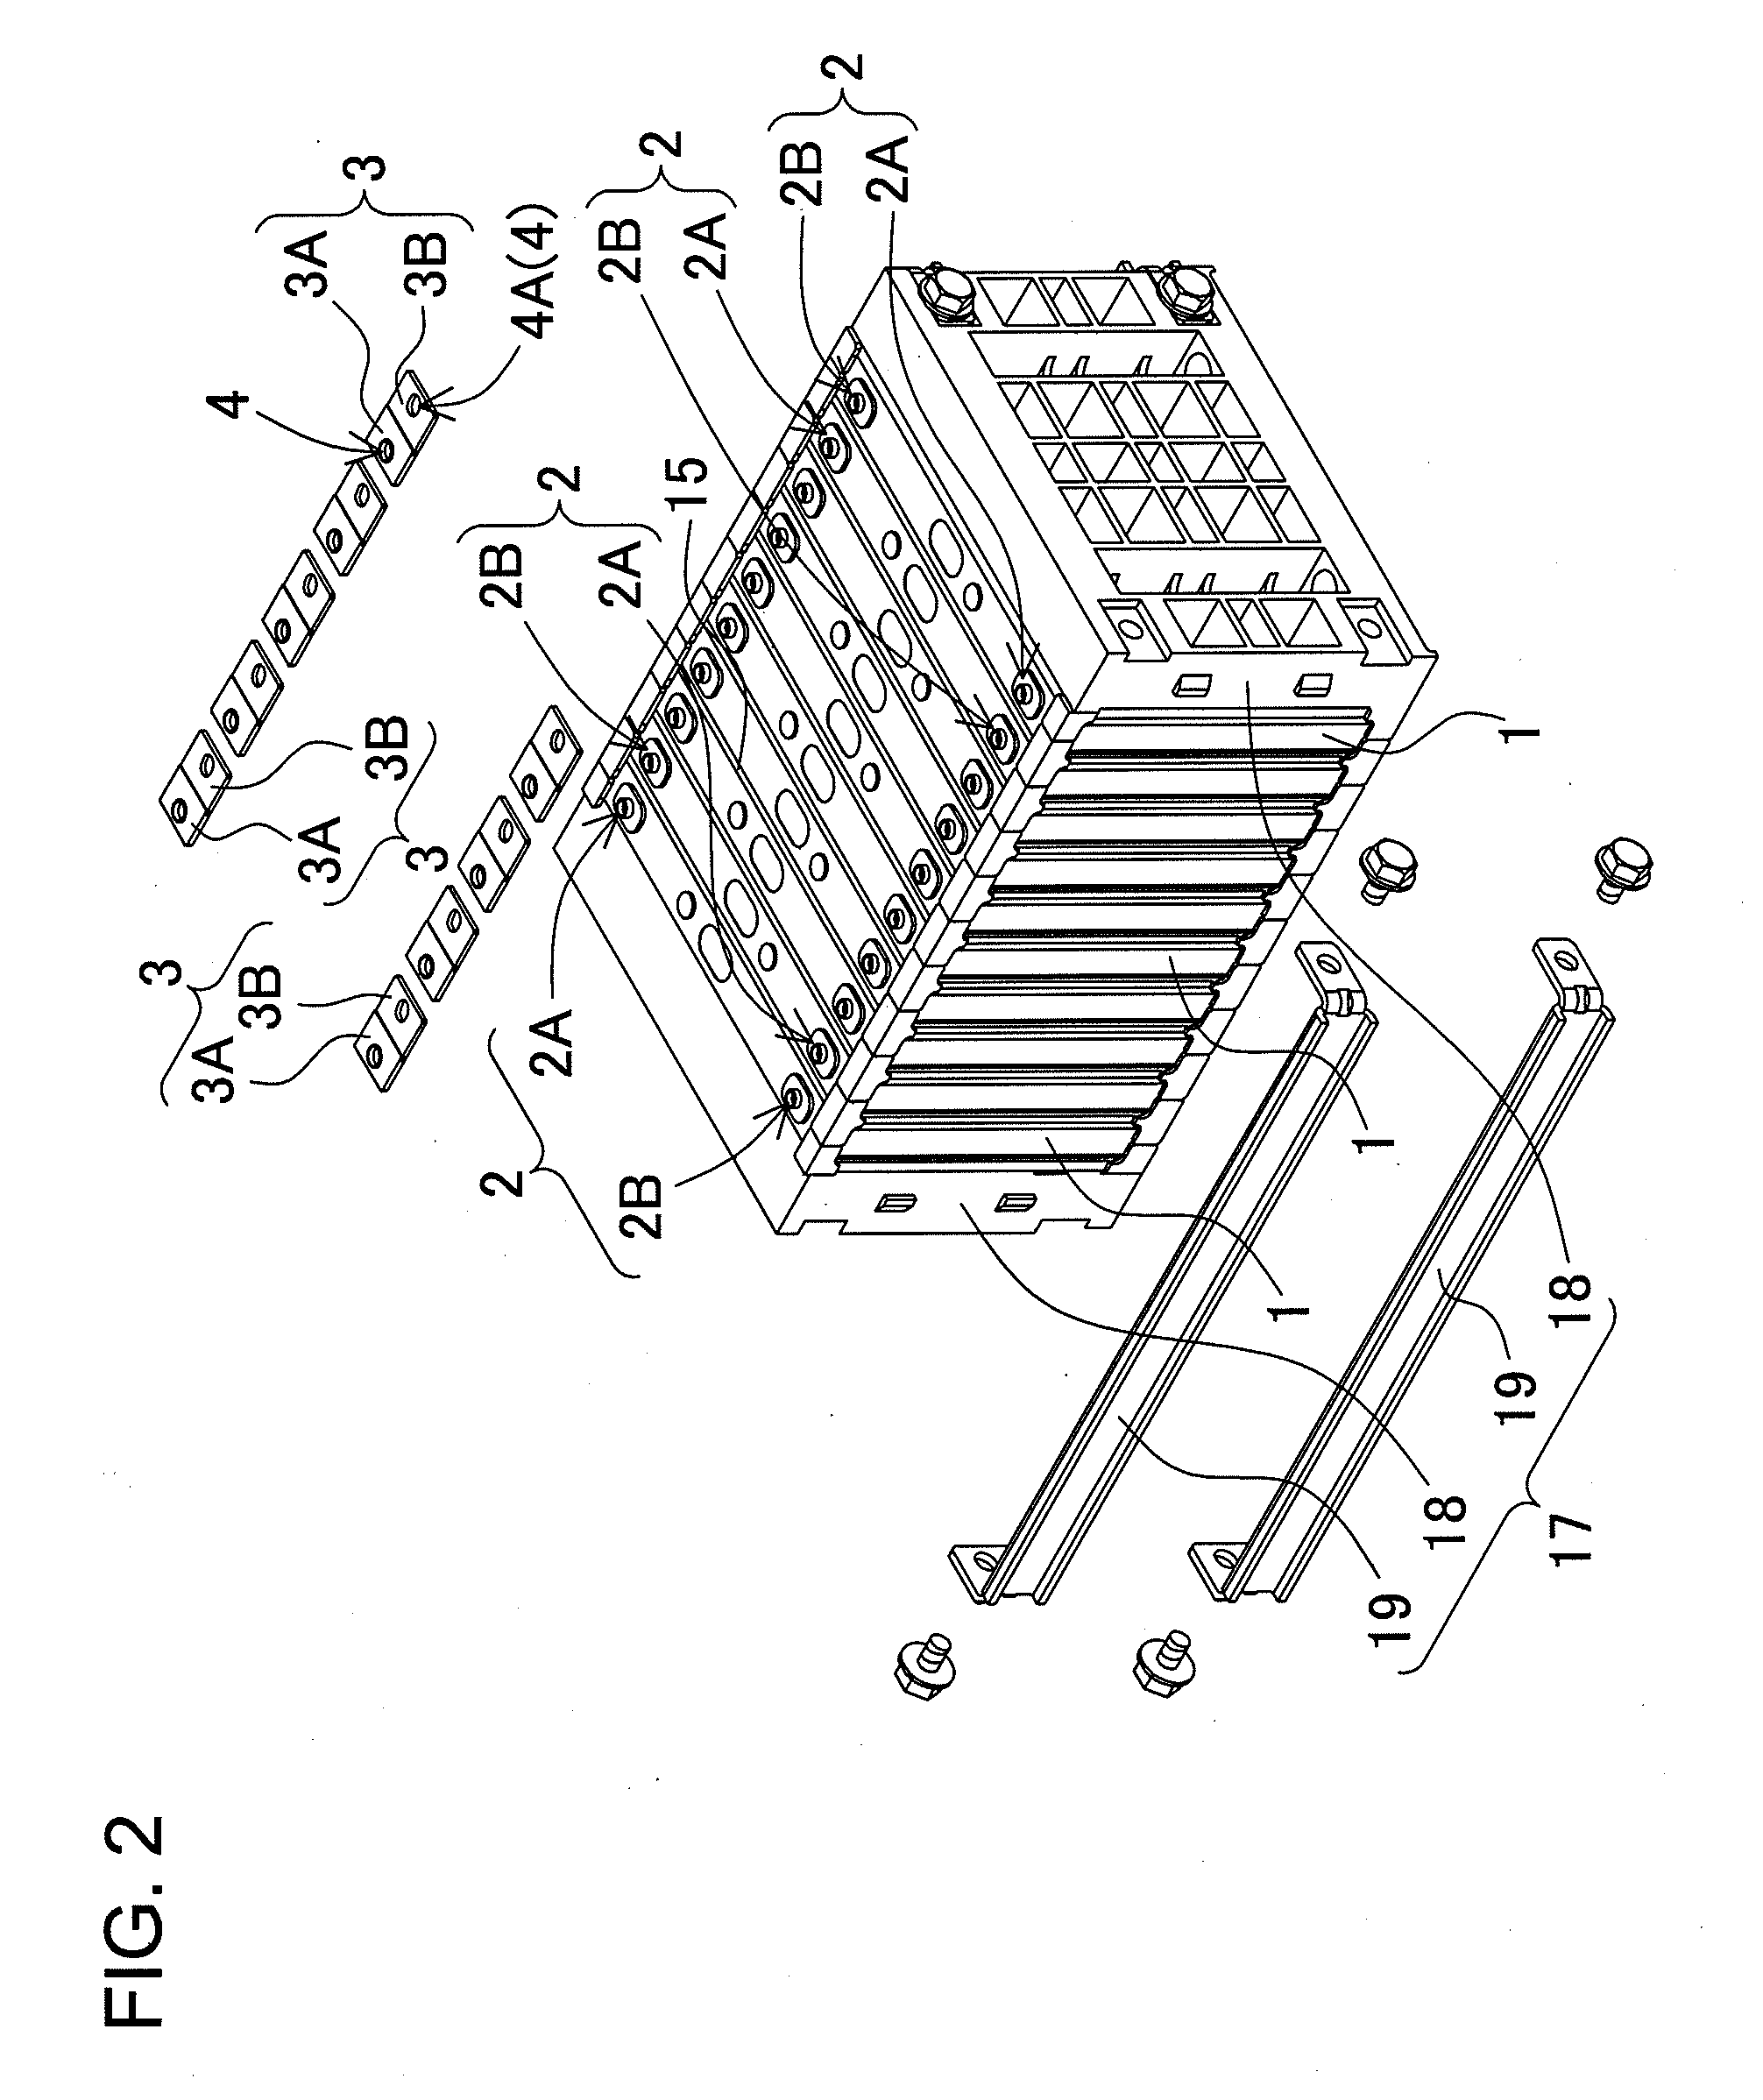 Battery array with reliable low-resistance connections